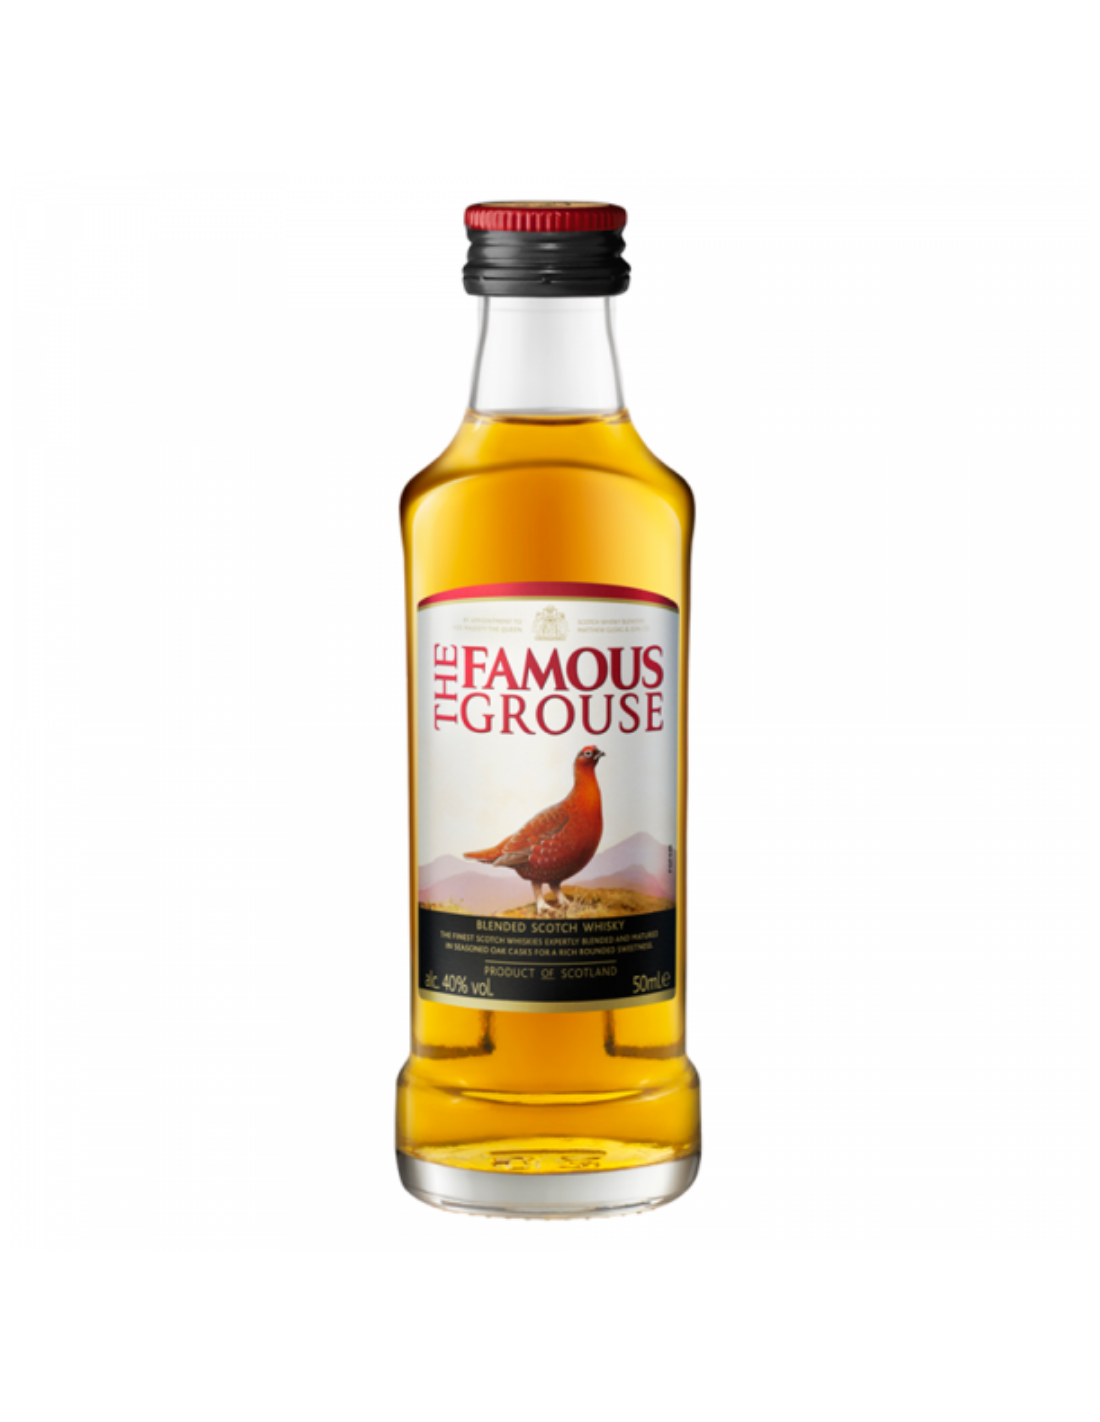 Whisky The Famous Grouse, 0.05L, 40% alc., Scotia alcooldiscount.ro